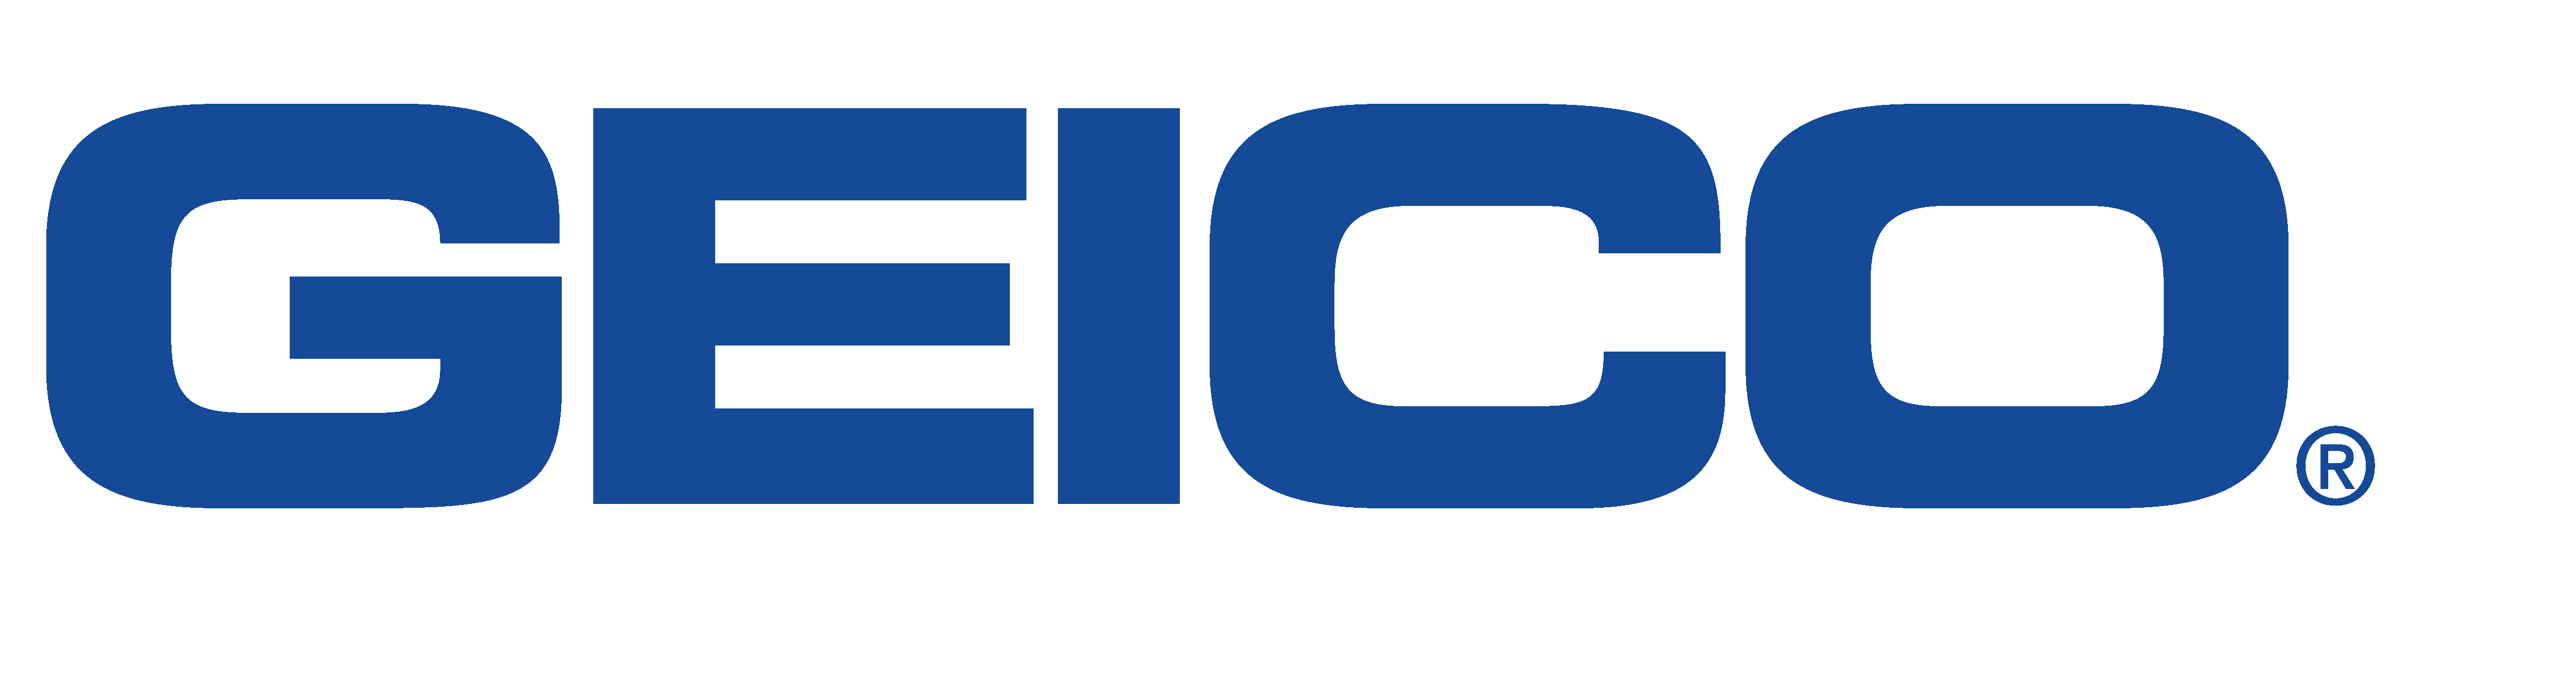 Gieco Logo - GEICO Logo for Sponsors Version if Needed